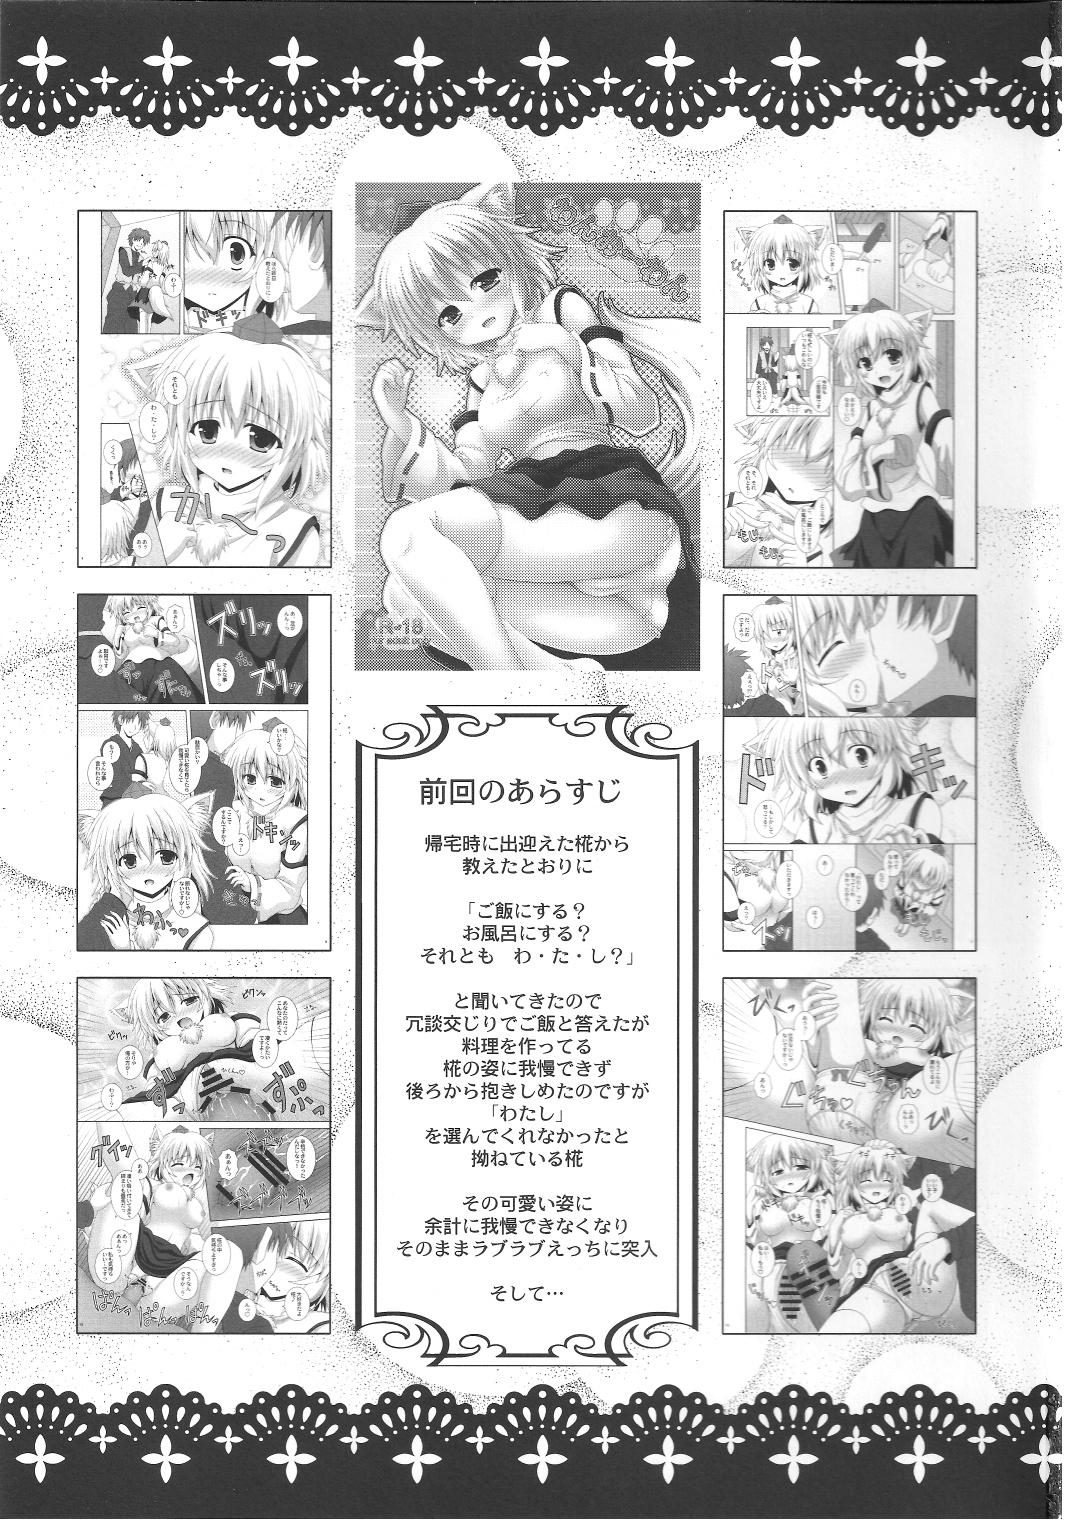 Best Blow Jobs Ever Wan O Wan Issho ni Ofuro - Touhou project Gay Theresome - Page 2